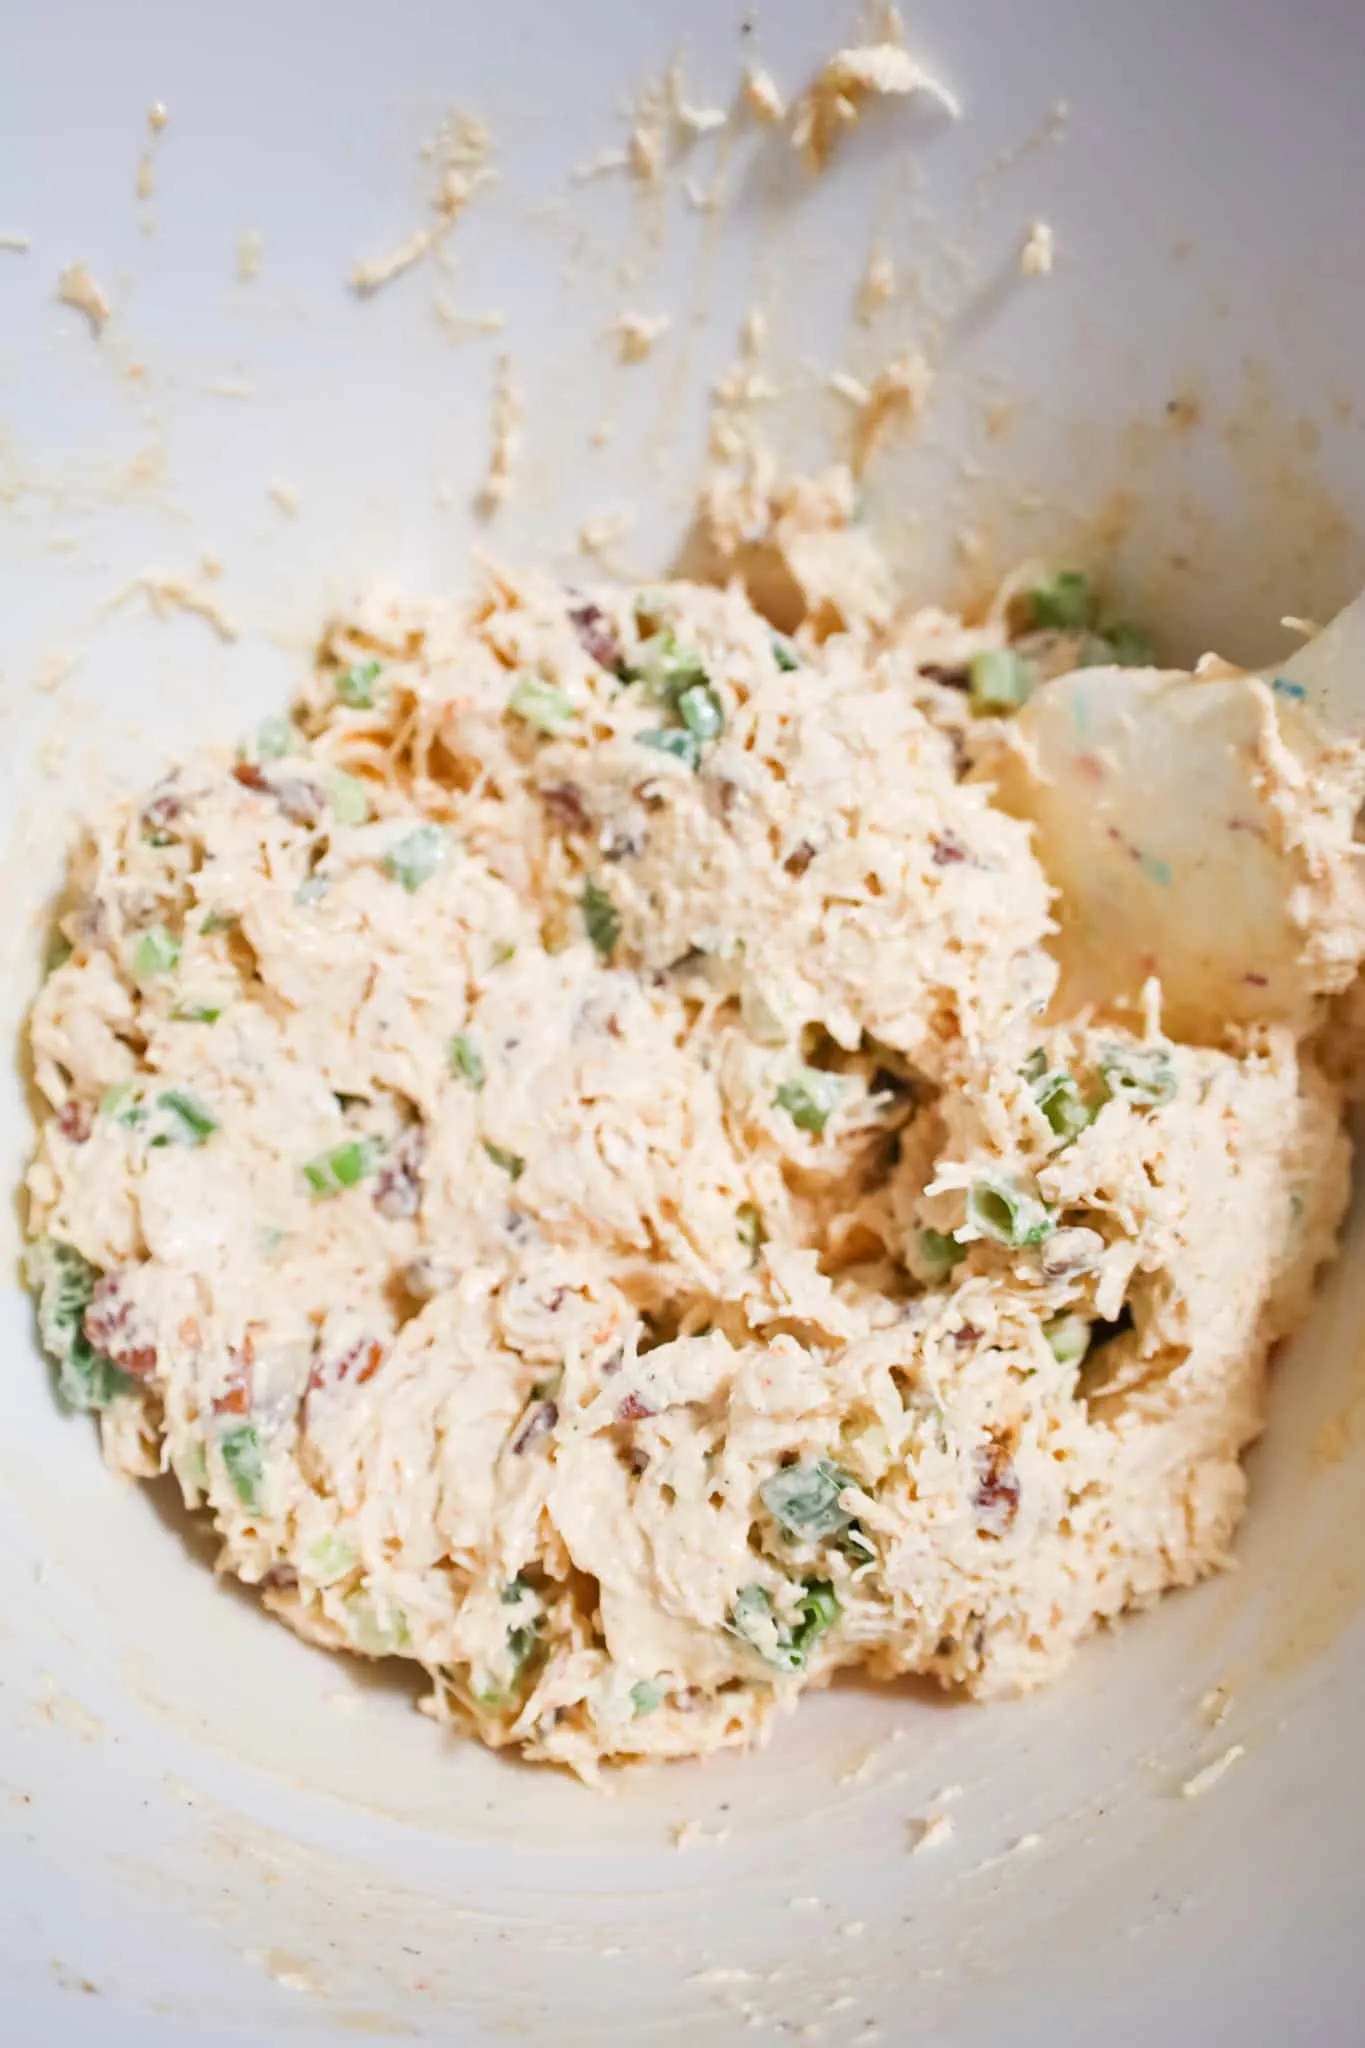 shredded chicken salad mixture in a mixing bowl